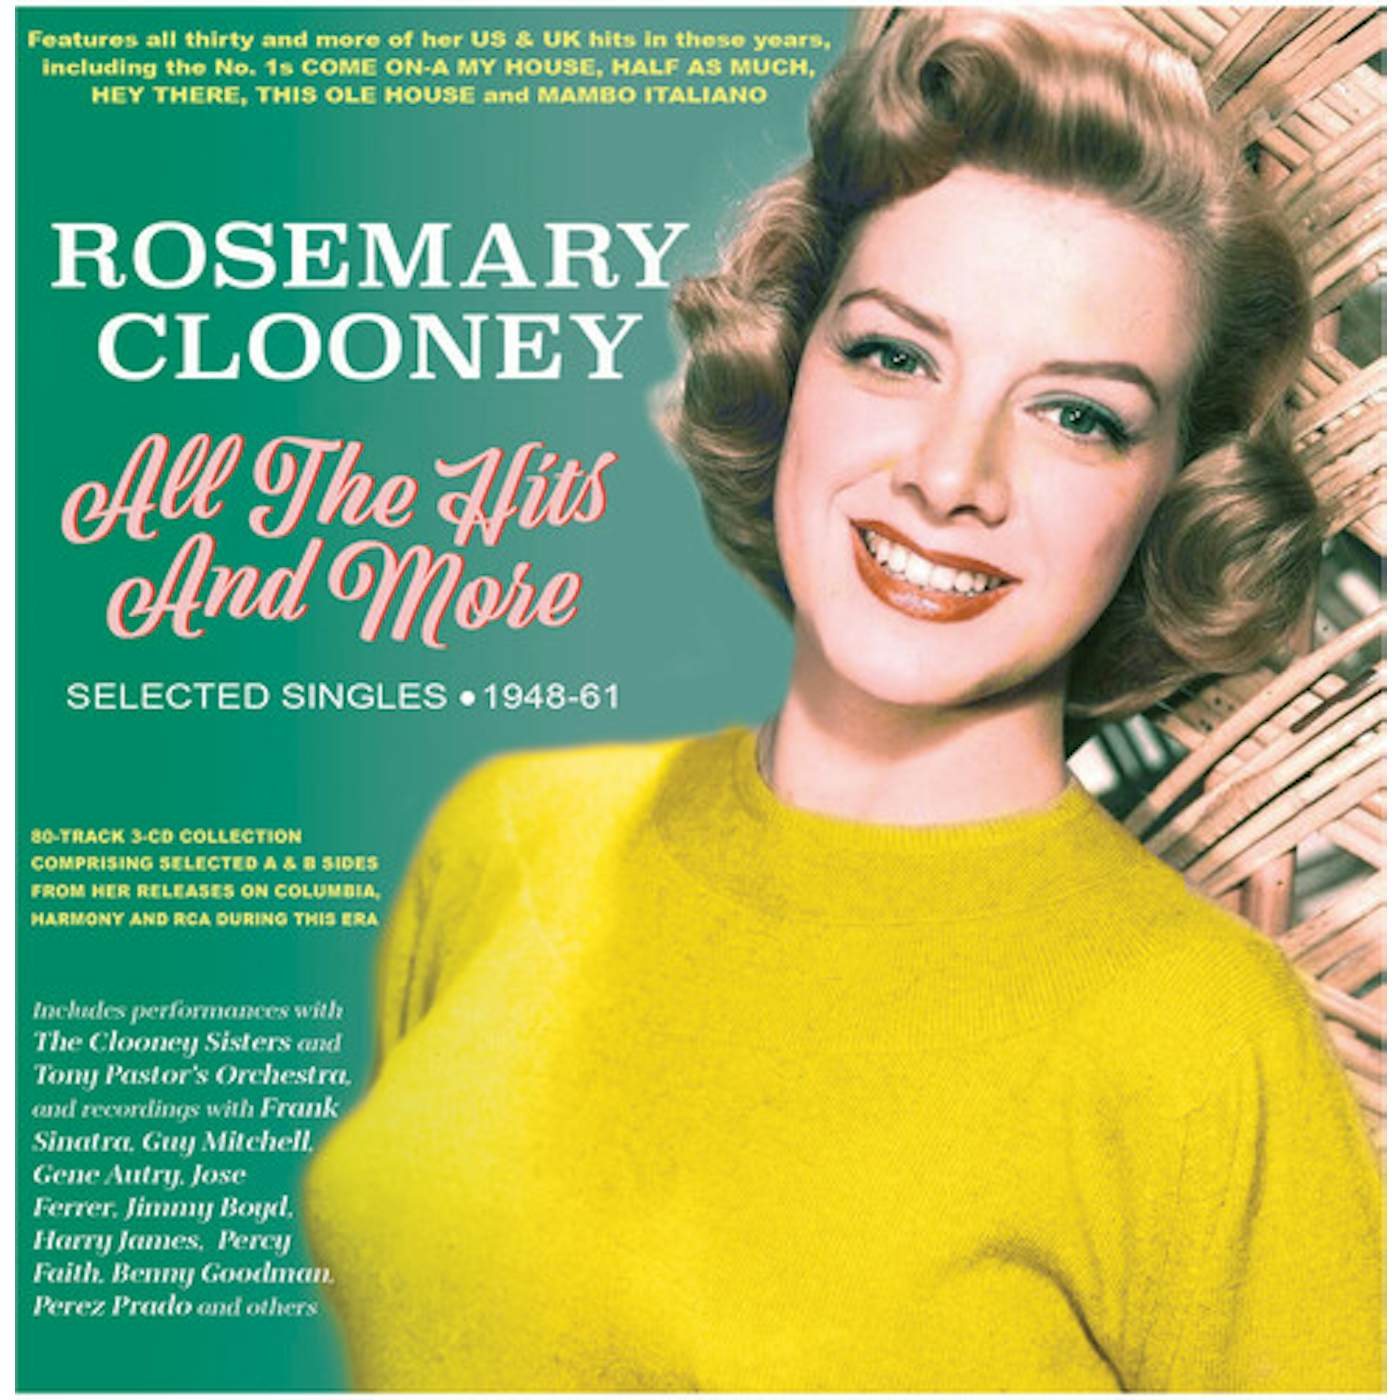 Rosemary Clooney ALL THE HITS AND MORE: SELECTED SINGLES 1948-61 CD